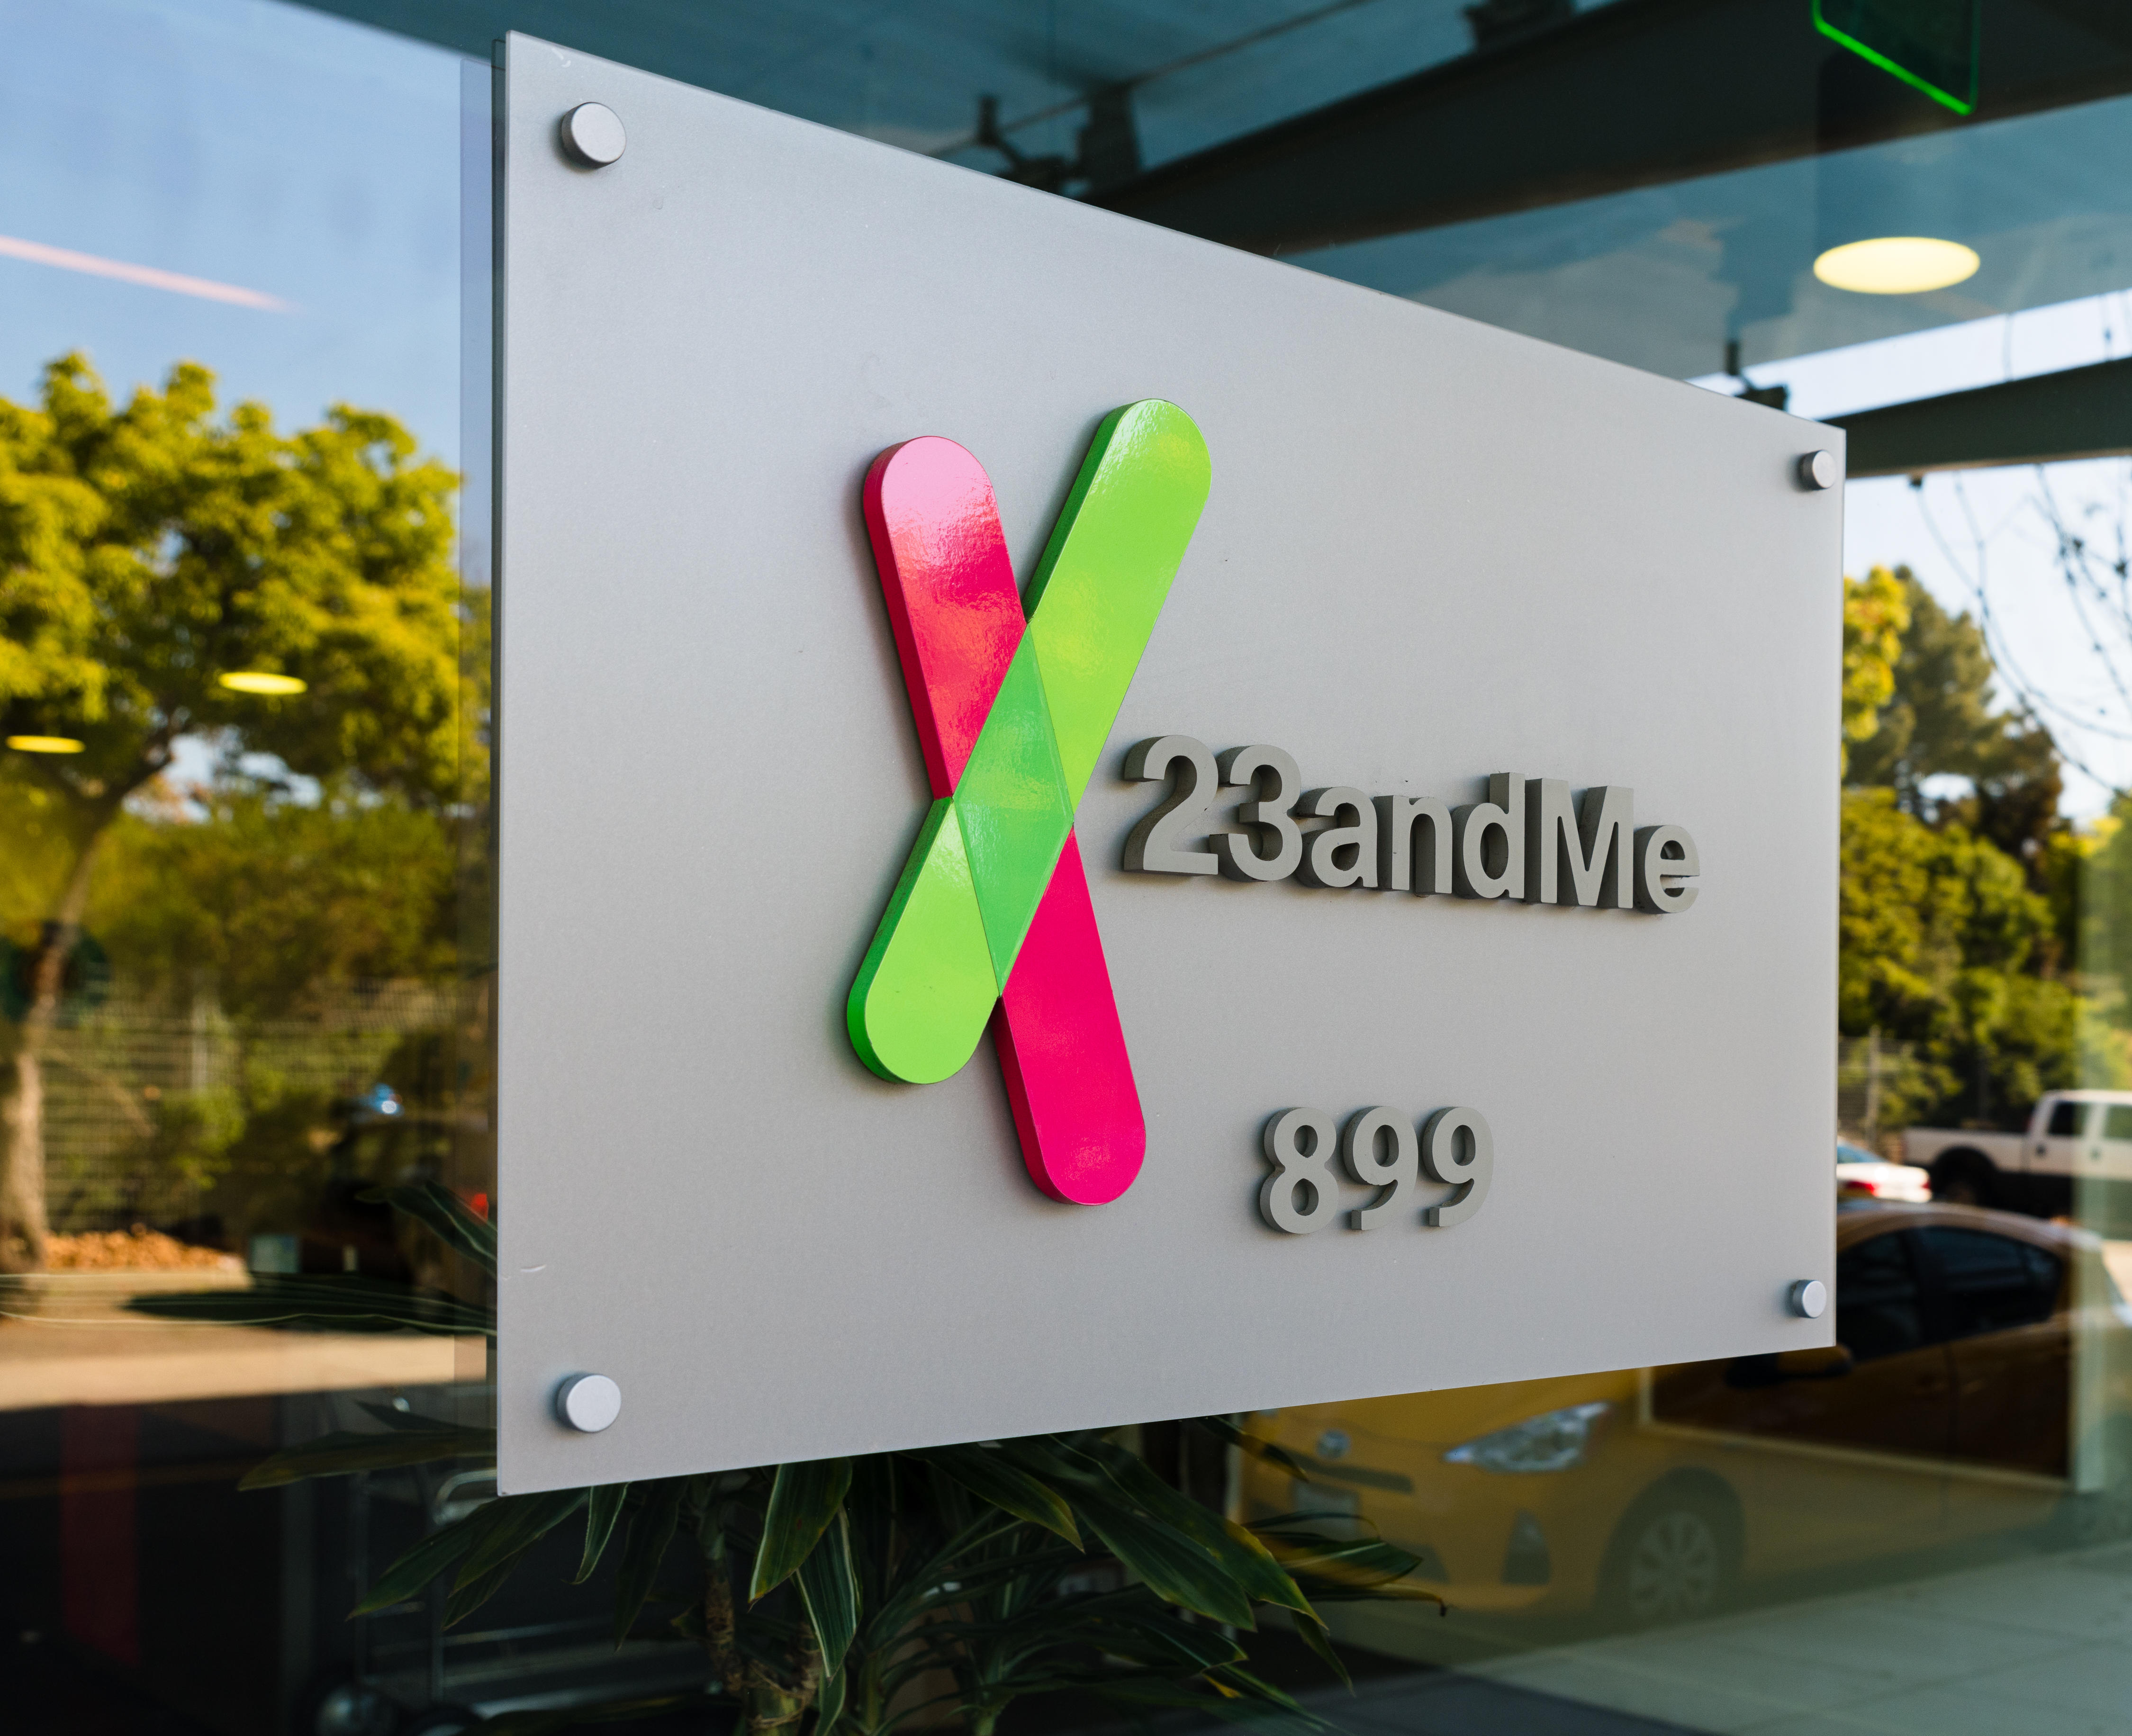 From Dark Reading – 23andMe: ‘Negligent’ Users at Fault for Breach of 6.9M Records